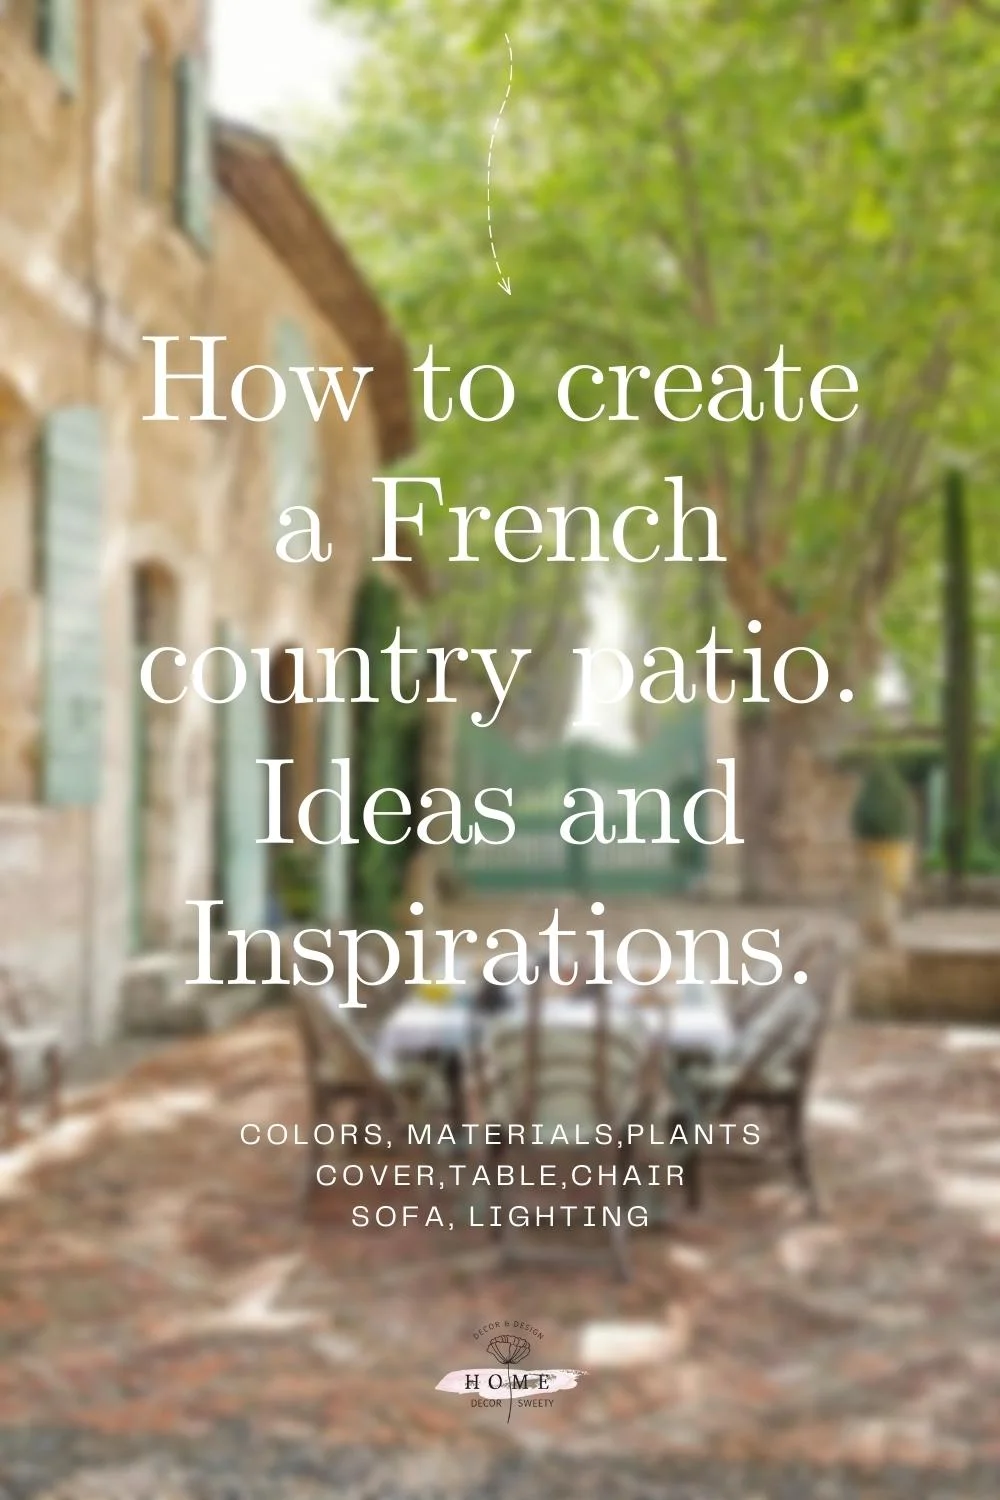 How to create a French country patio. Ideas and Inspirations.